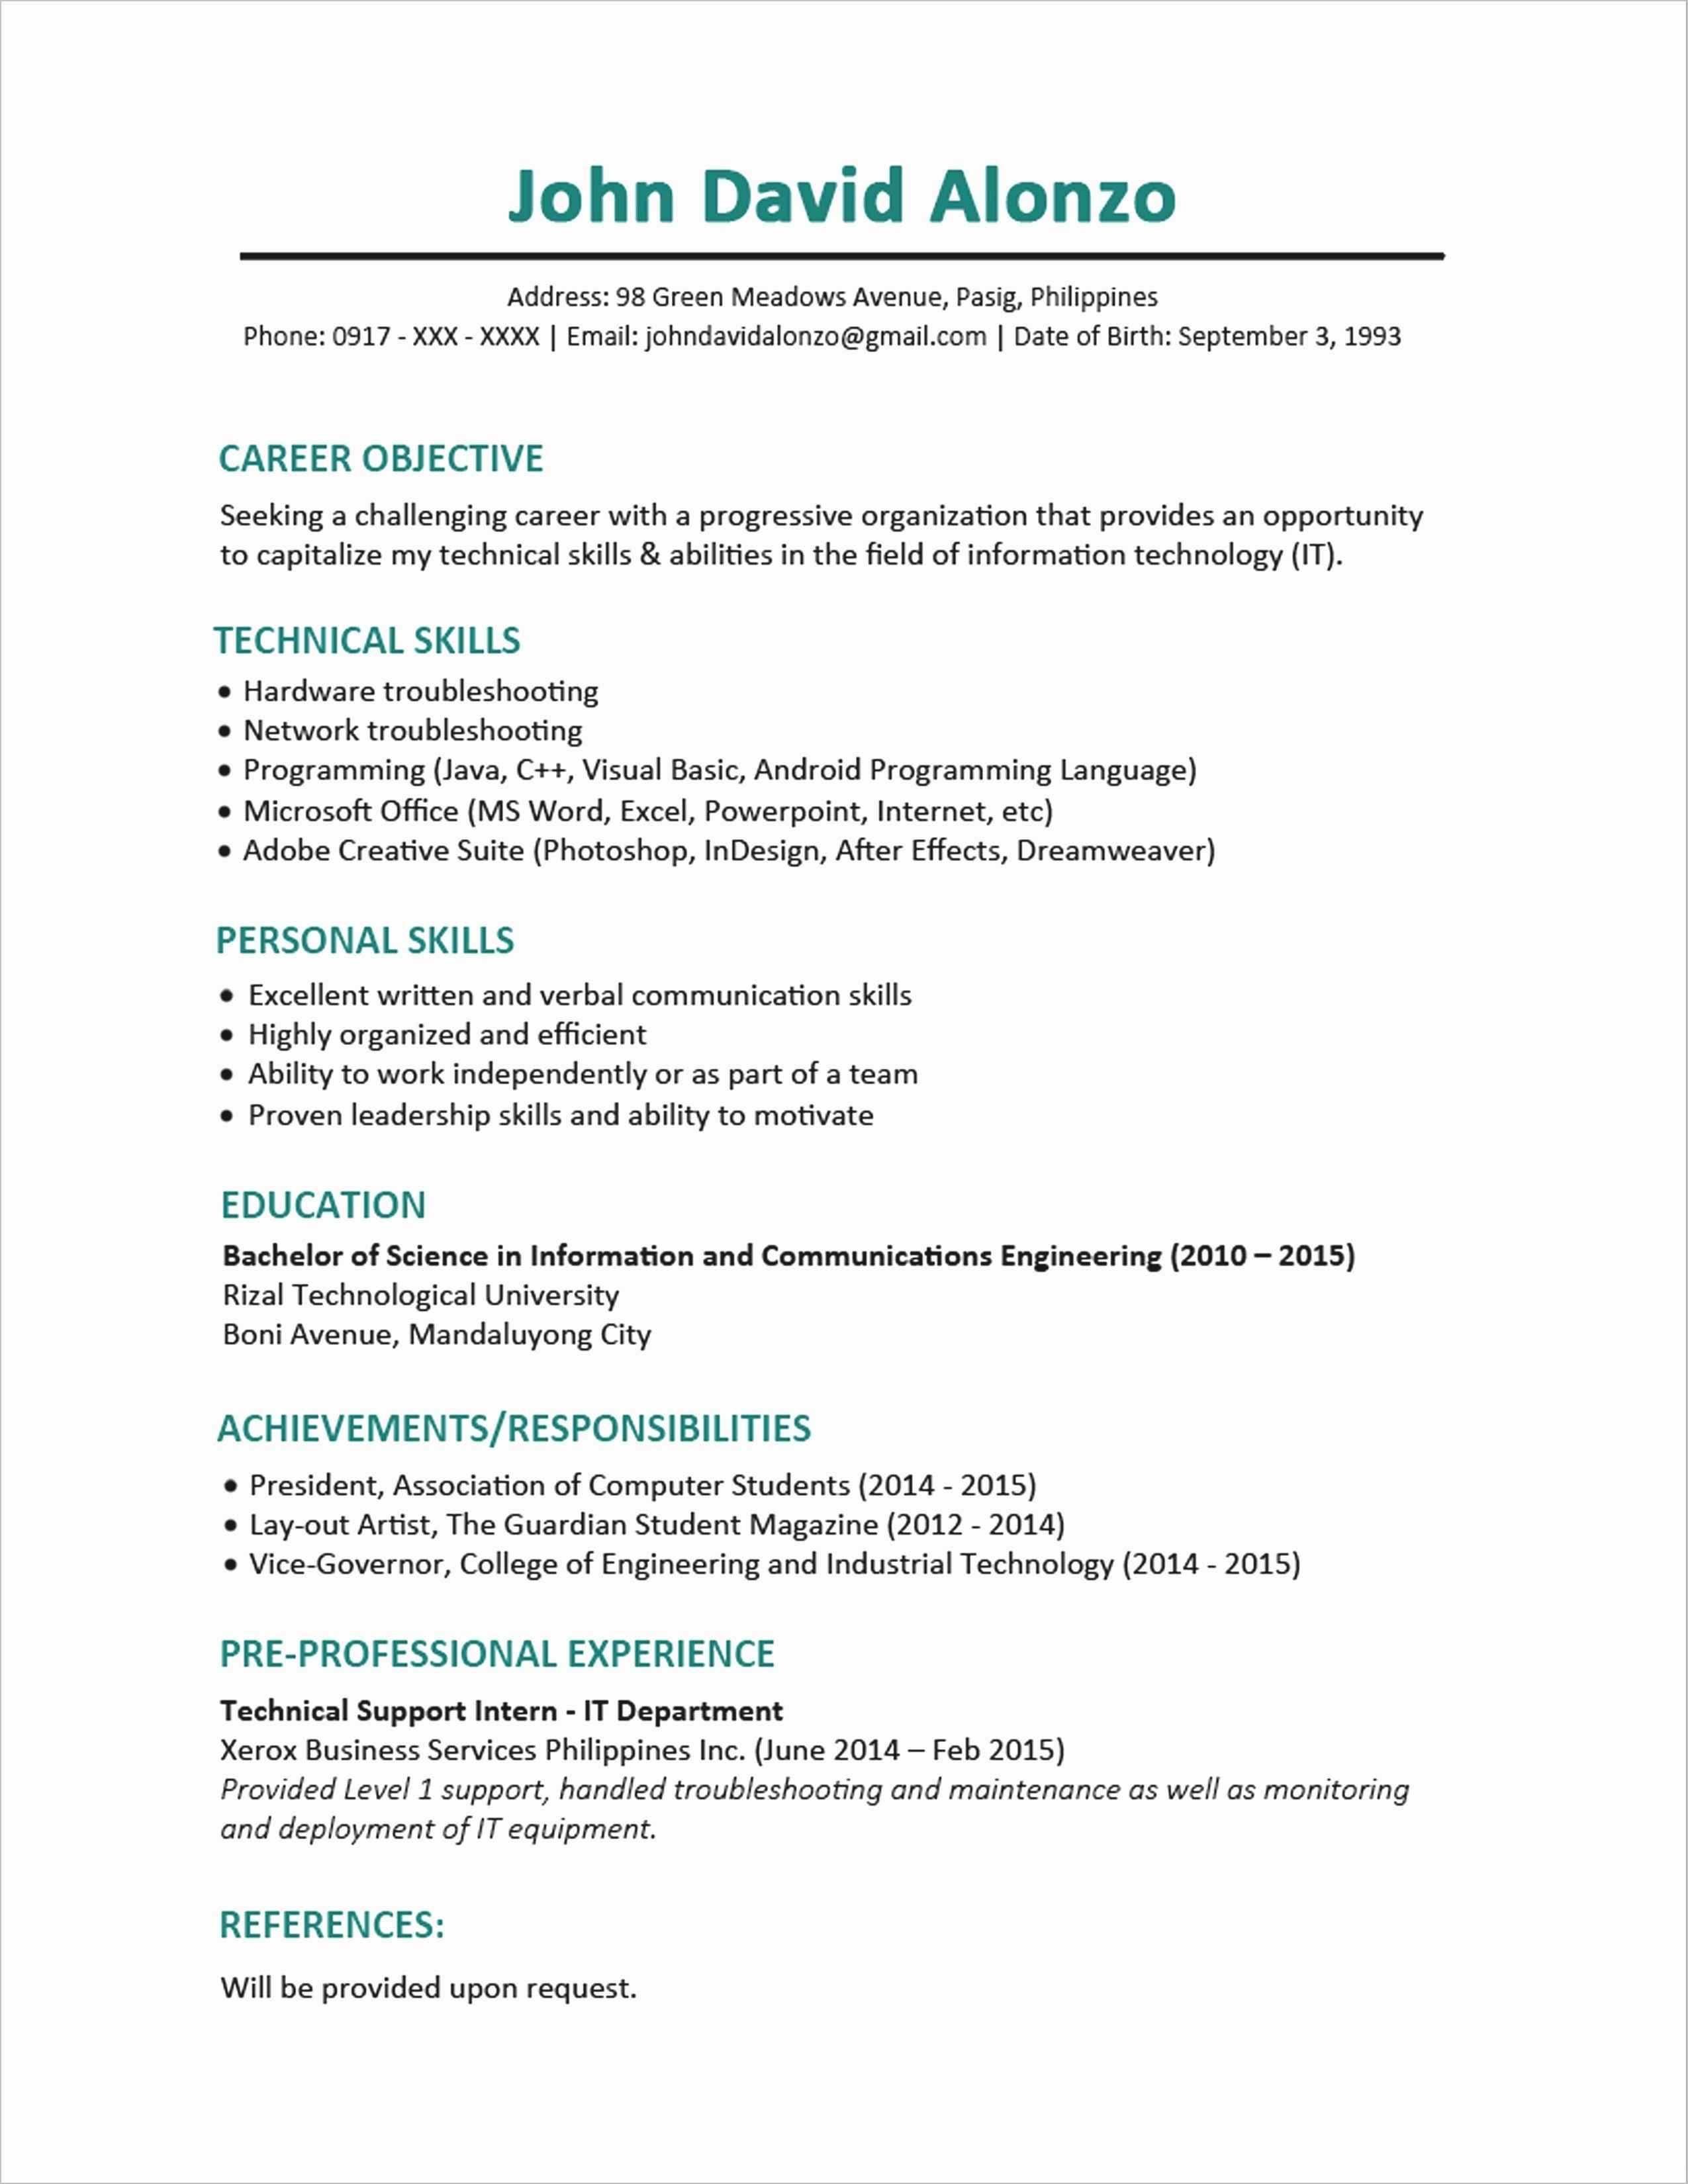 Resume Template Creative Free Downloads Microsoft Works Templates